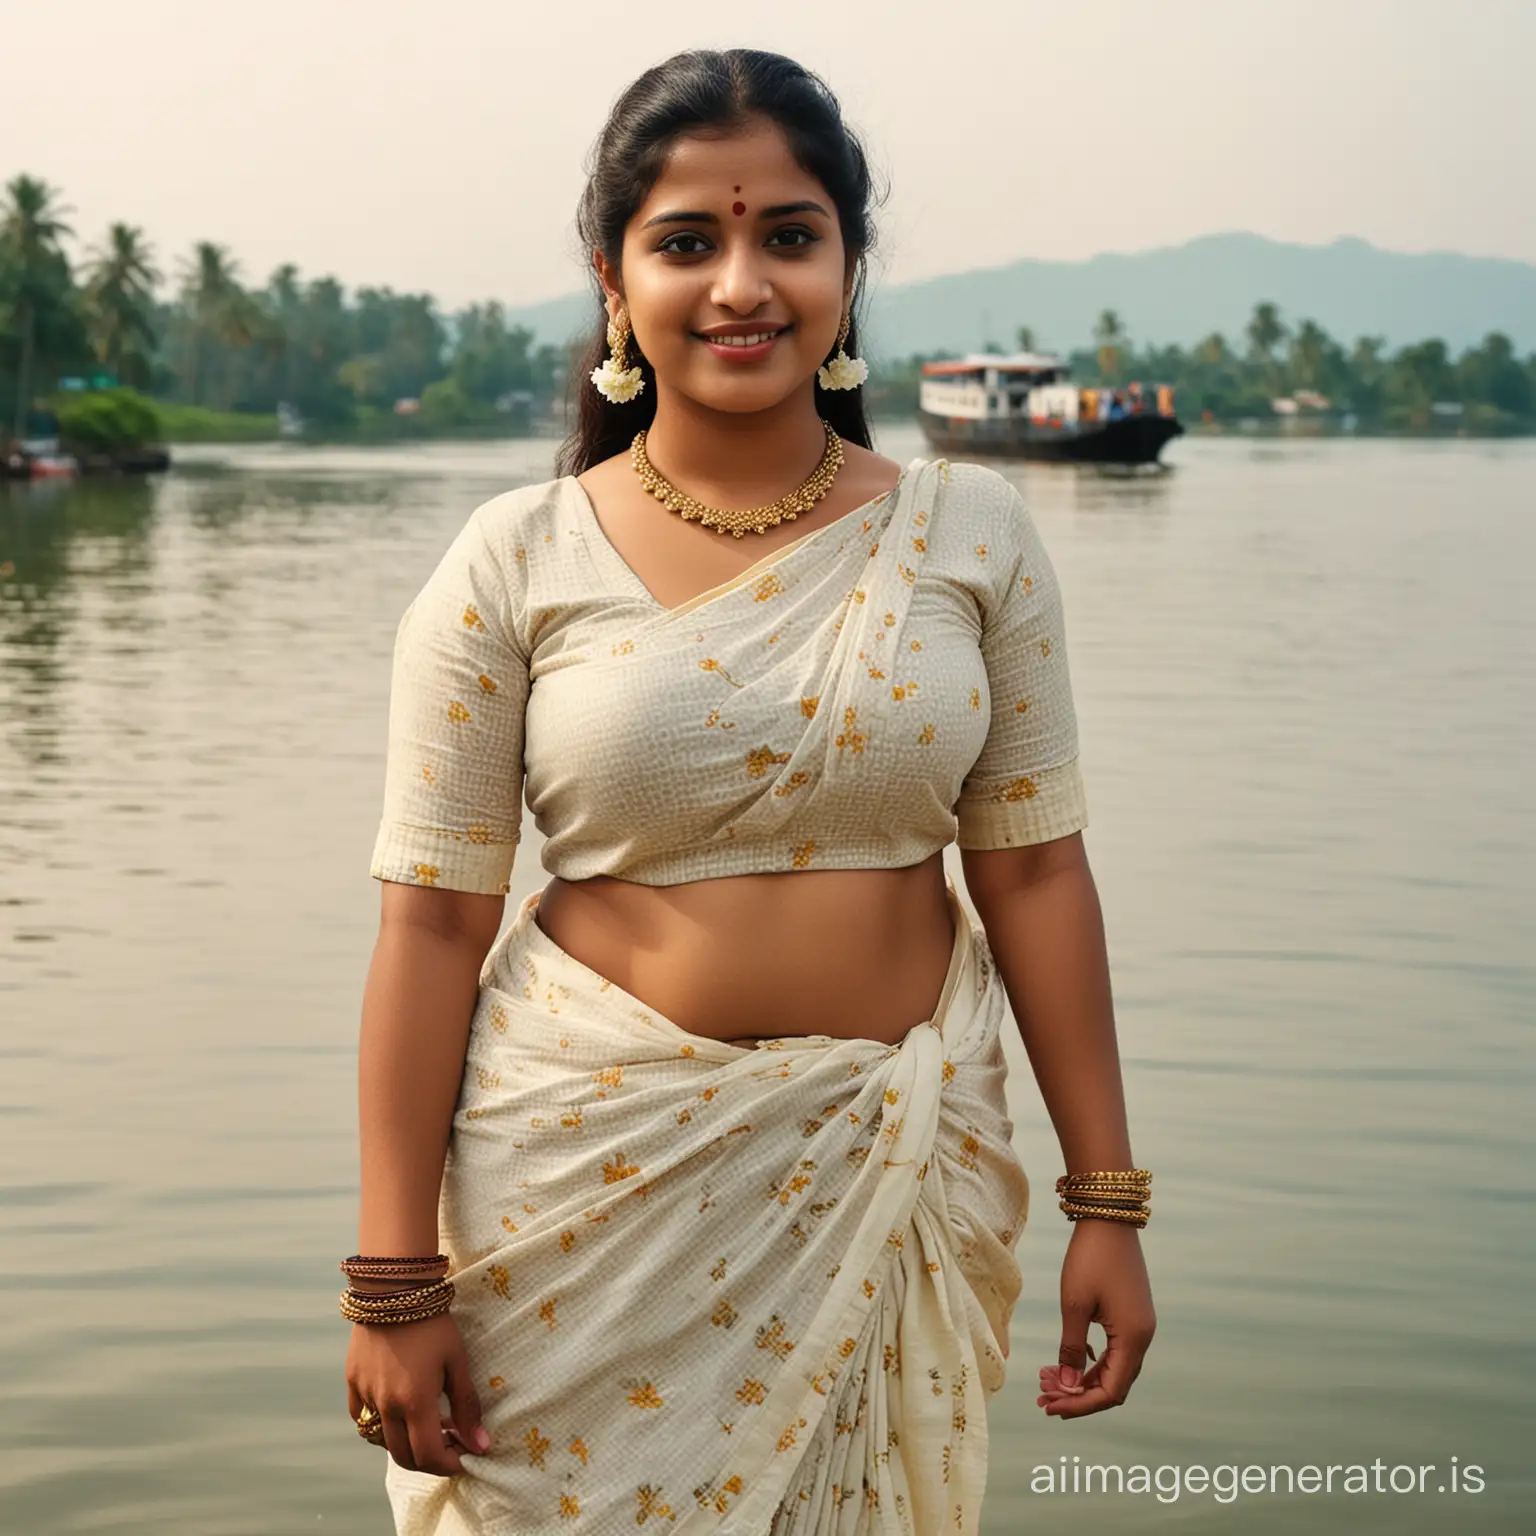 Sensual-Malayali-Women-Posing-Romantically-with-Traditional-Accessories